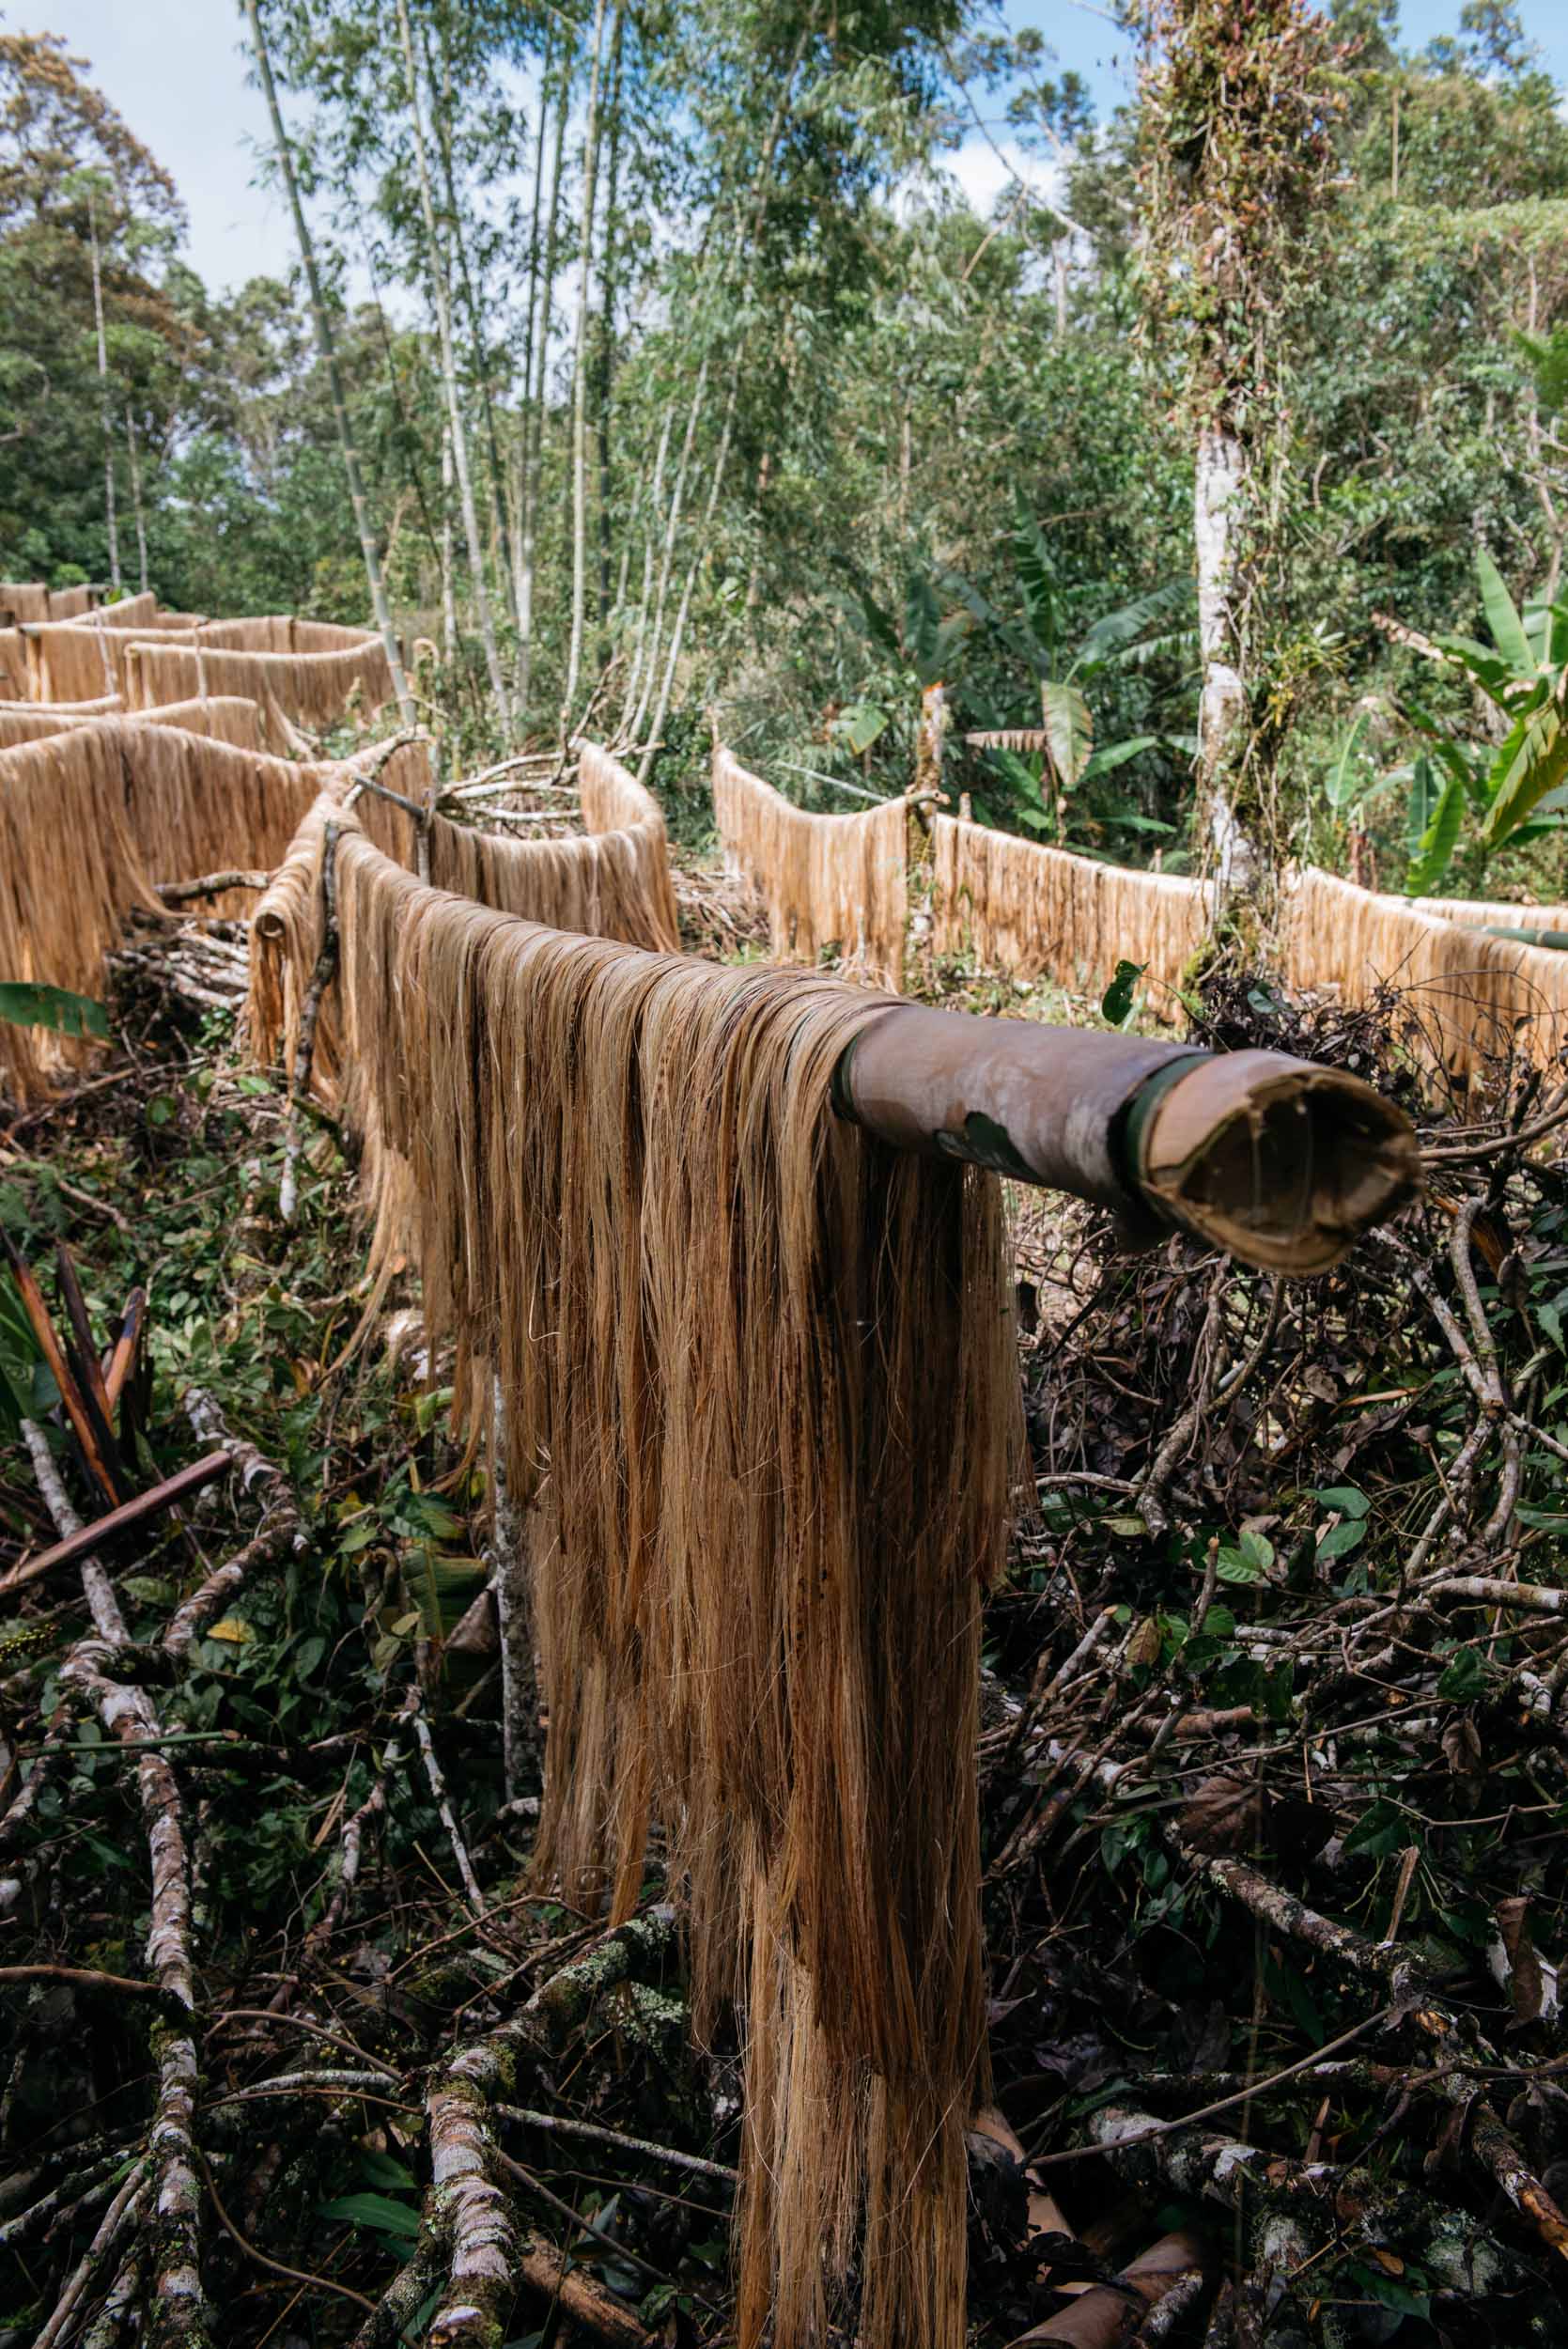  Once stripped, the farmers will then hang these fibers in wood panels placed in sun-directed areas within the forest. Sun-drying lasts for half a day up to two days, depending on the weather. 